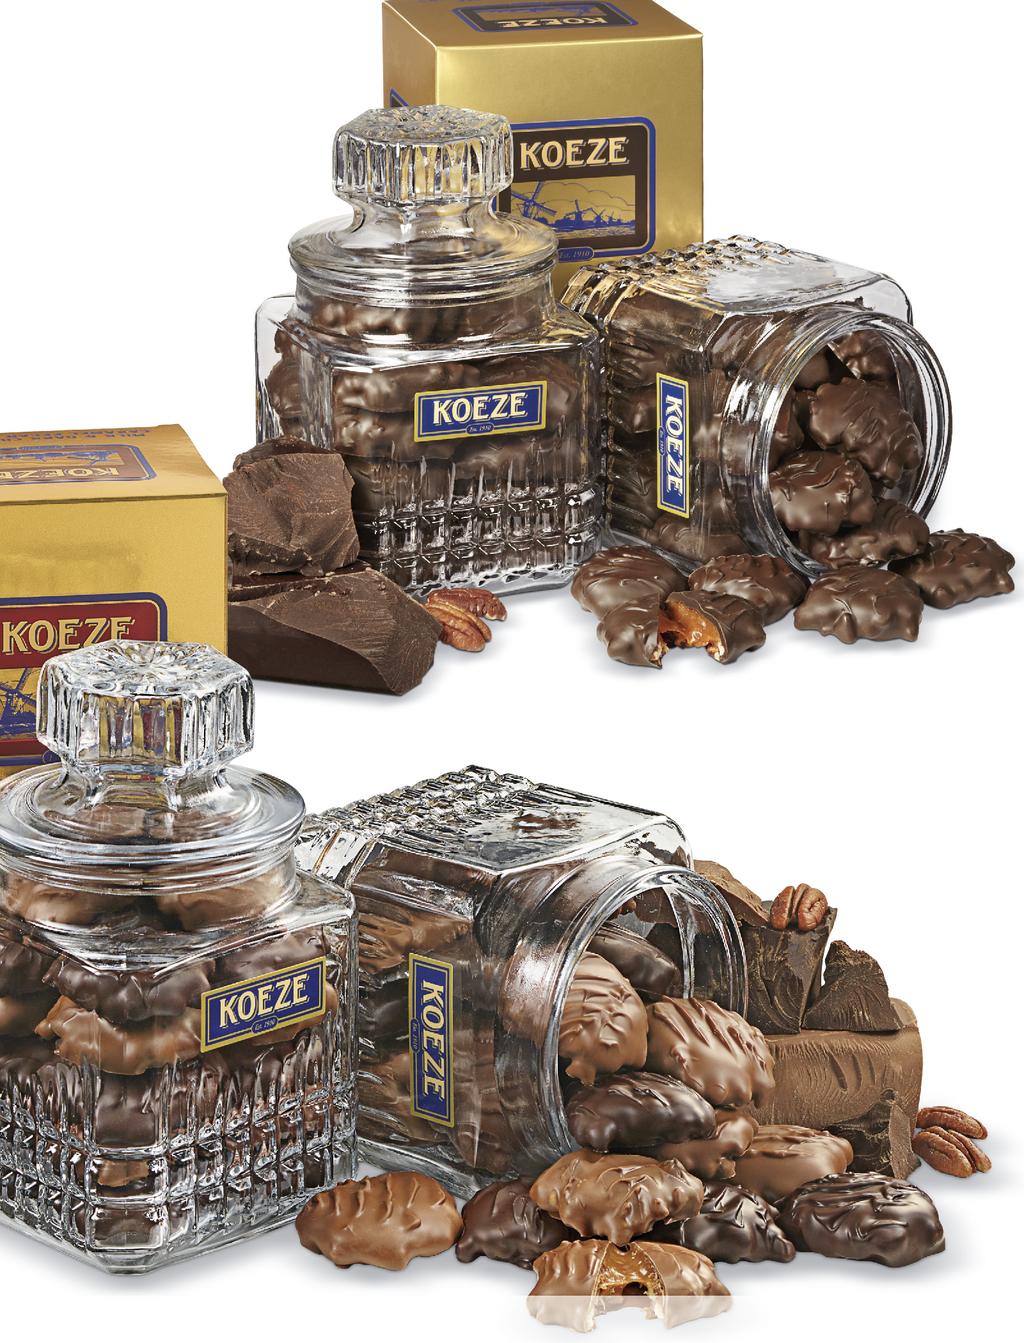 DARK CHOCOLATE TURTLES The intense flavor of dark chocolate is the perfect contrast to our soft, sweet caramel and crisp pecans. Comes carefully handpacked in Koeze s signature 19.5 oz.